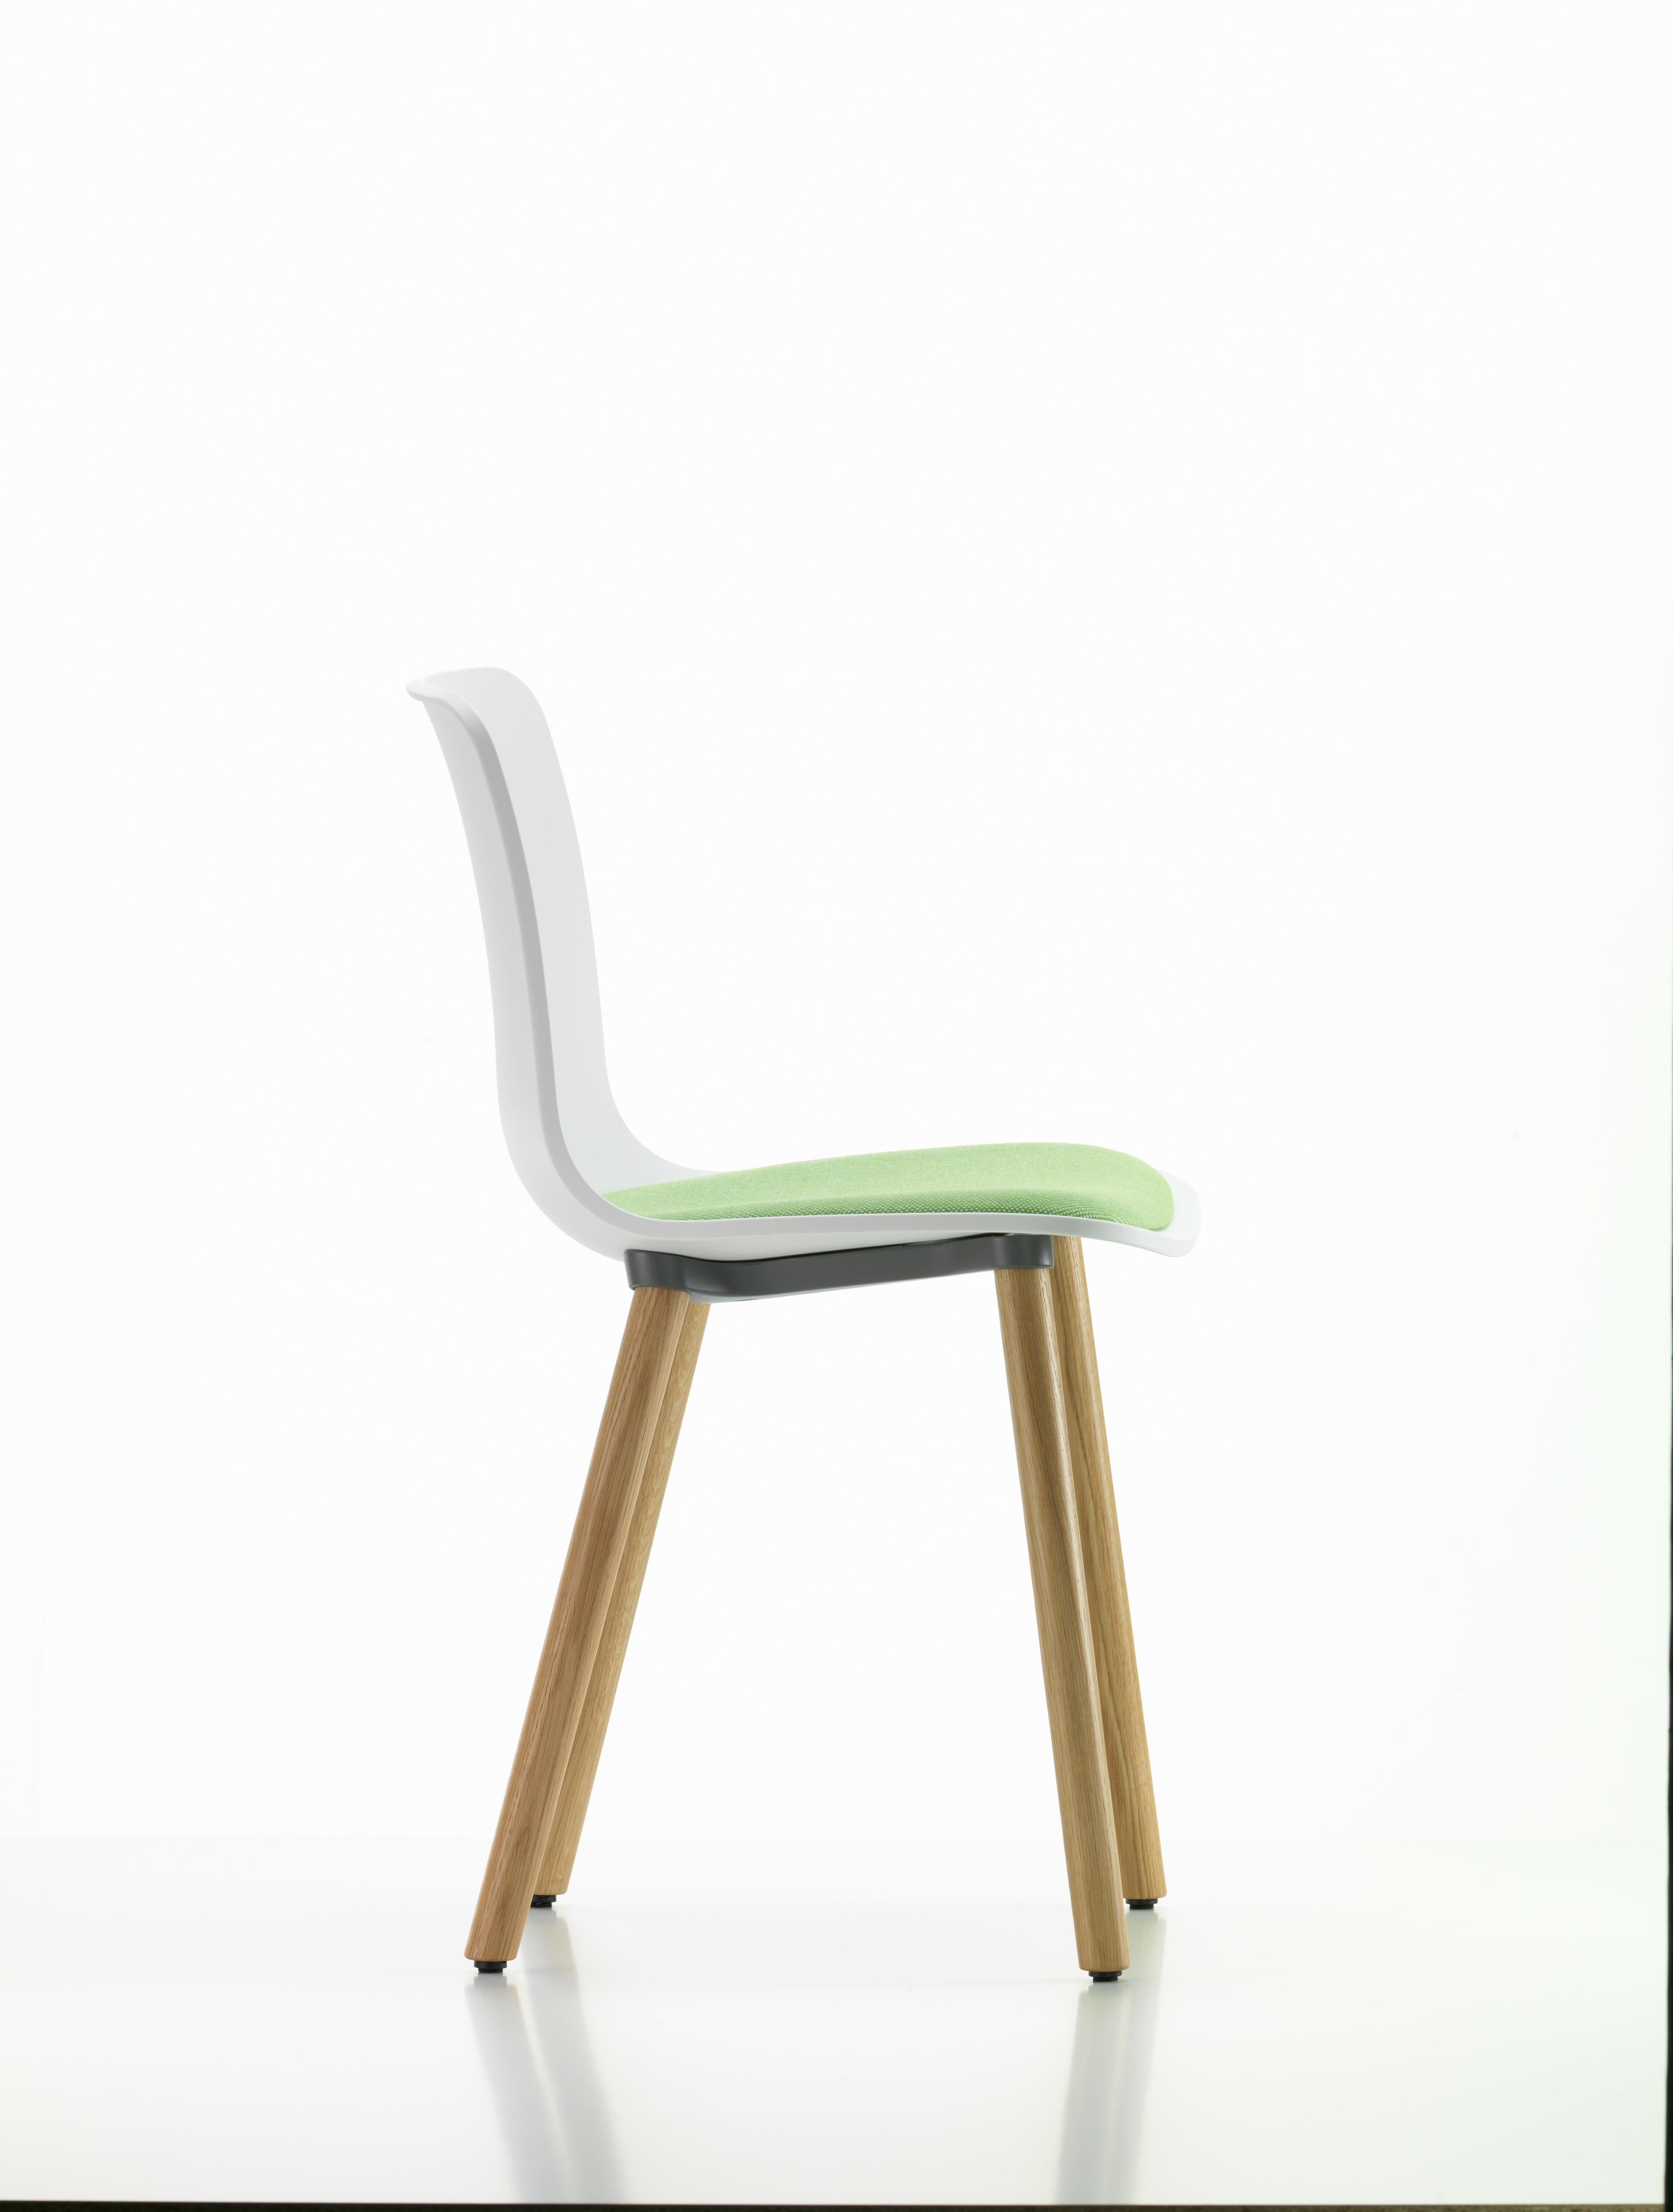 These products are only available in the United States.

The HAL Wood chair by Jasper Morrison is part of the multifaceted HAL family. The striking combination of a plastic seat shell and four-legged wooden base lends the chair its unique character.